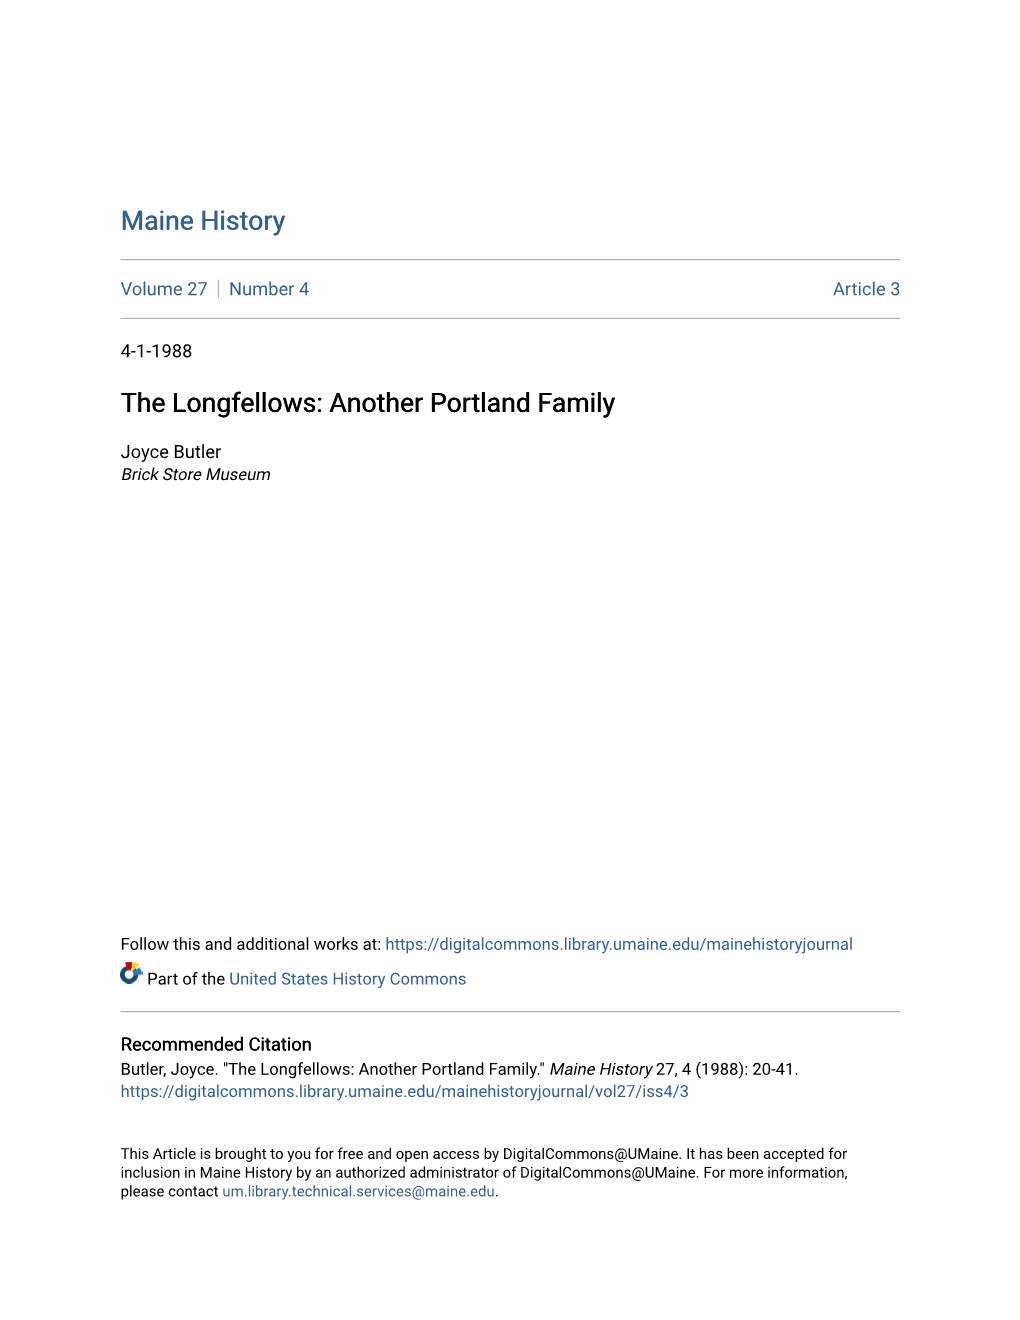 The Longfellows: Another Portland Family